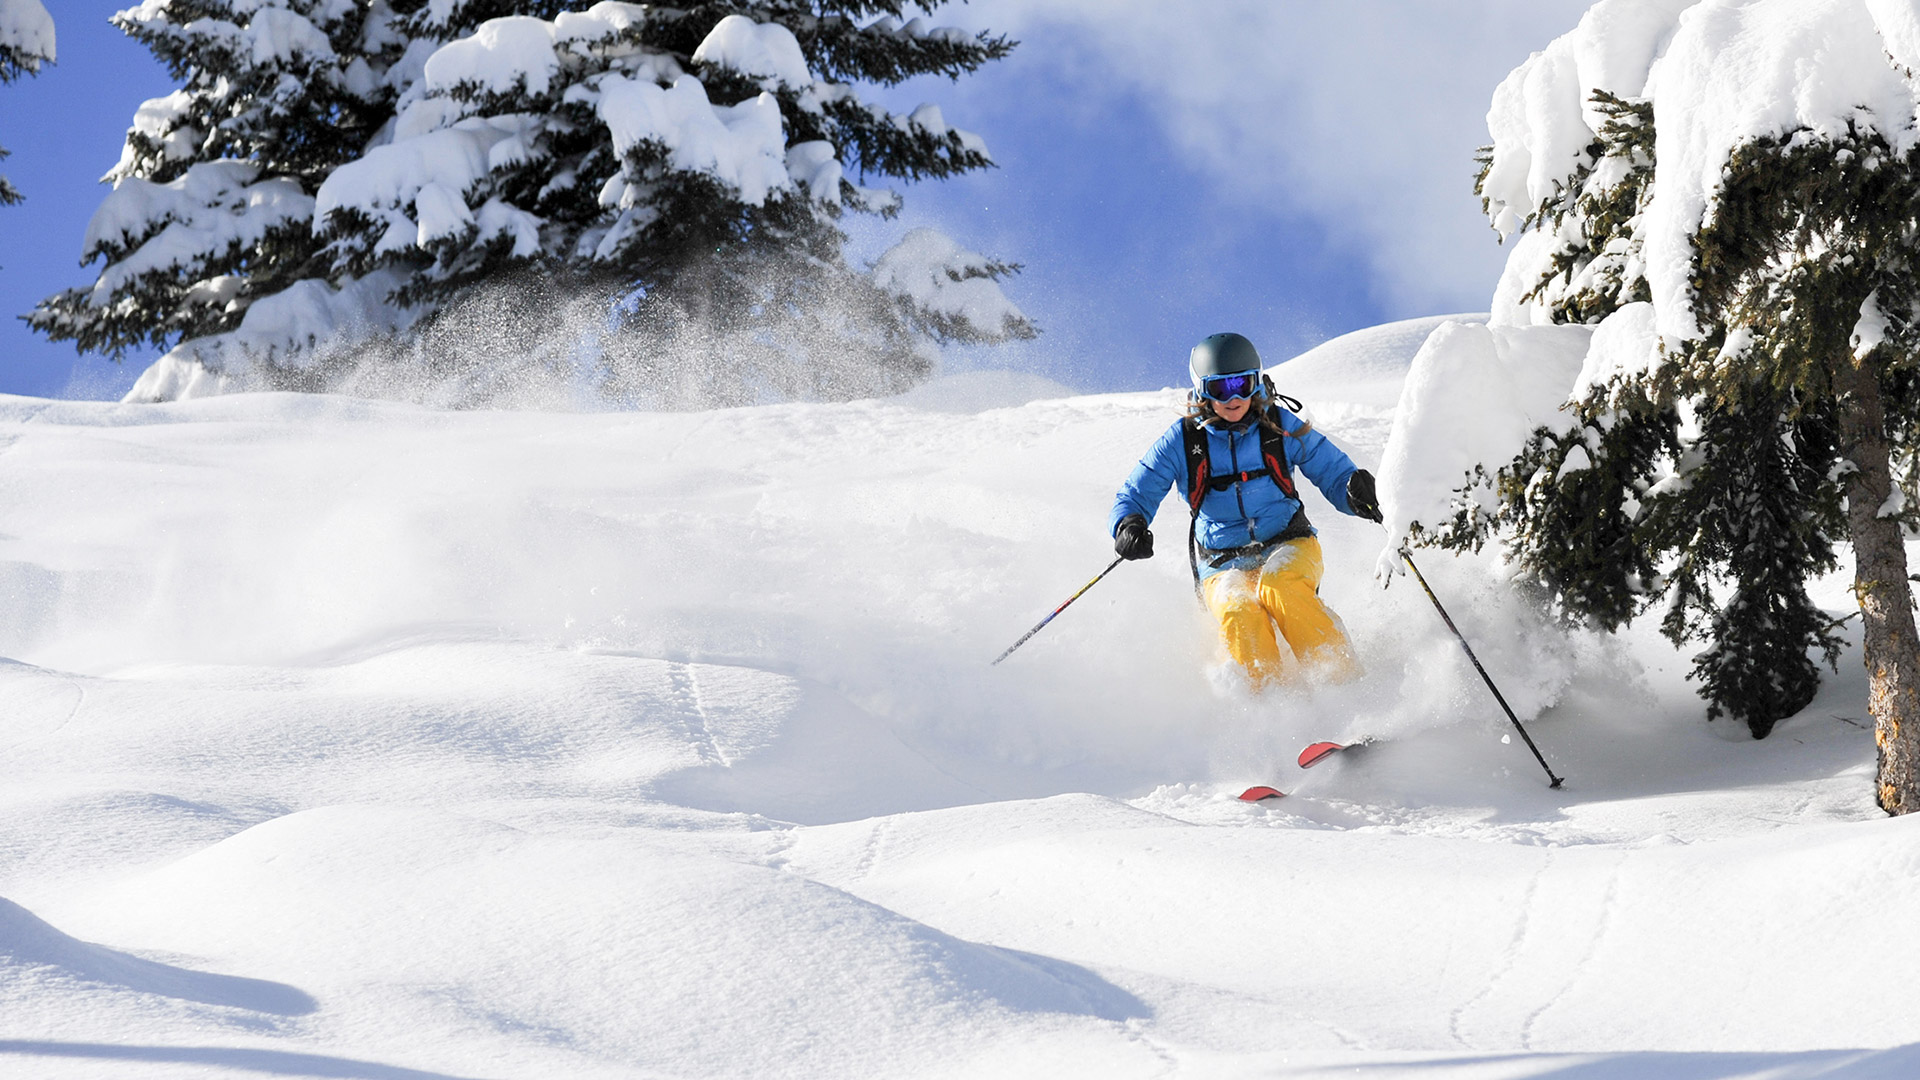 When is the best time to go skiing?